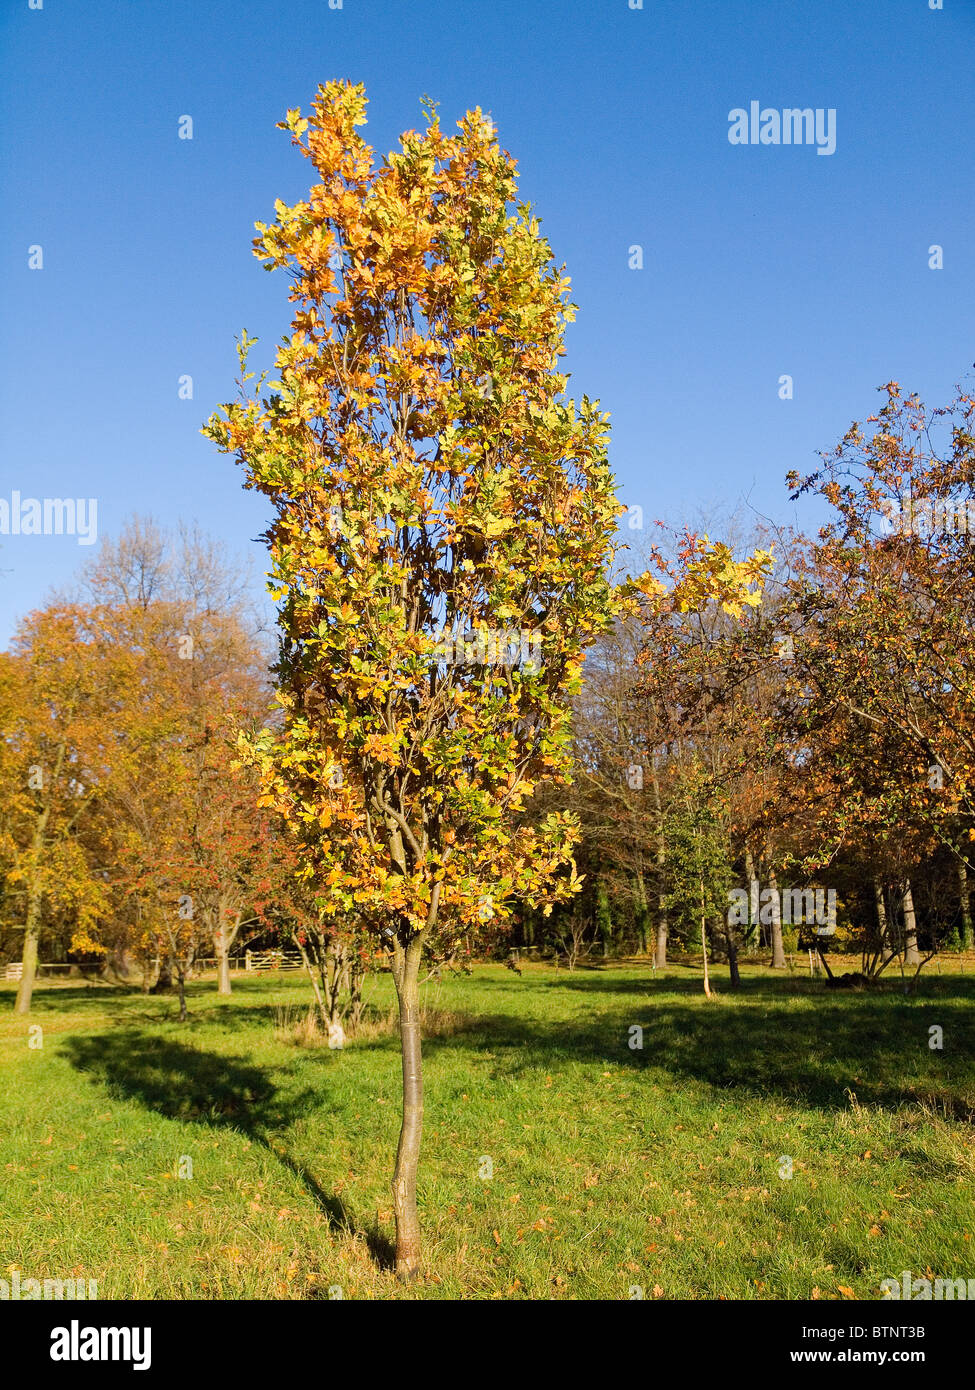 A young Cypress Oak tree Quercus robur f. fastigiata in autumn with the leaves turning yellow Stock Photo